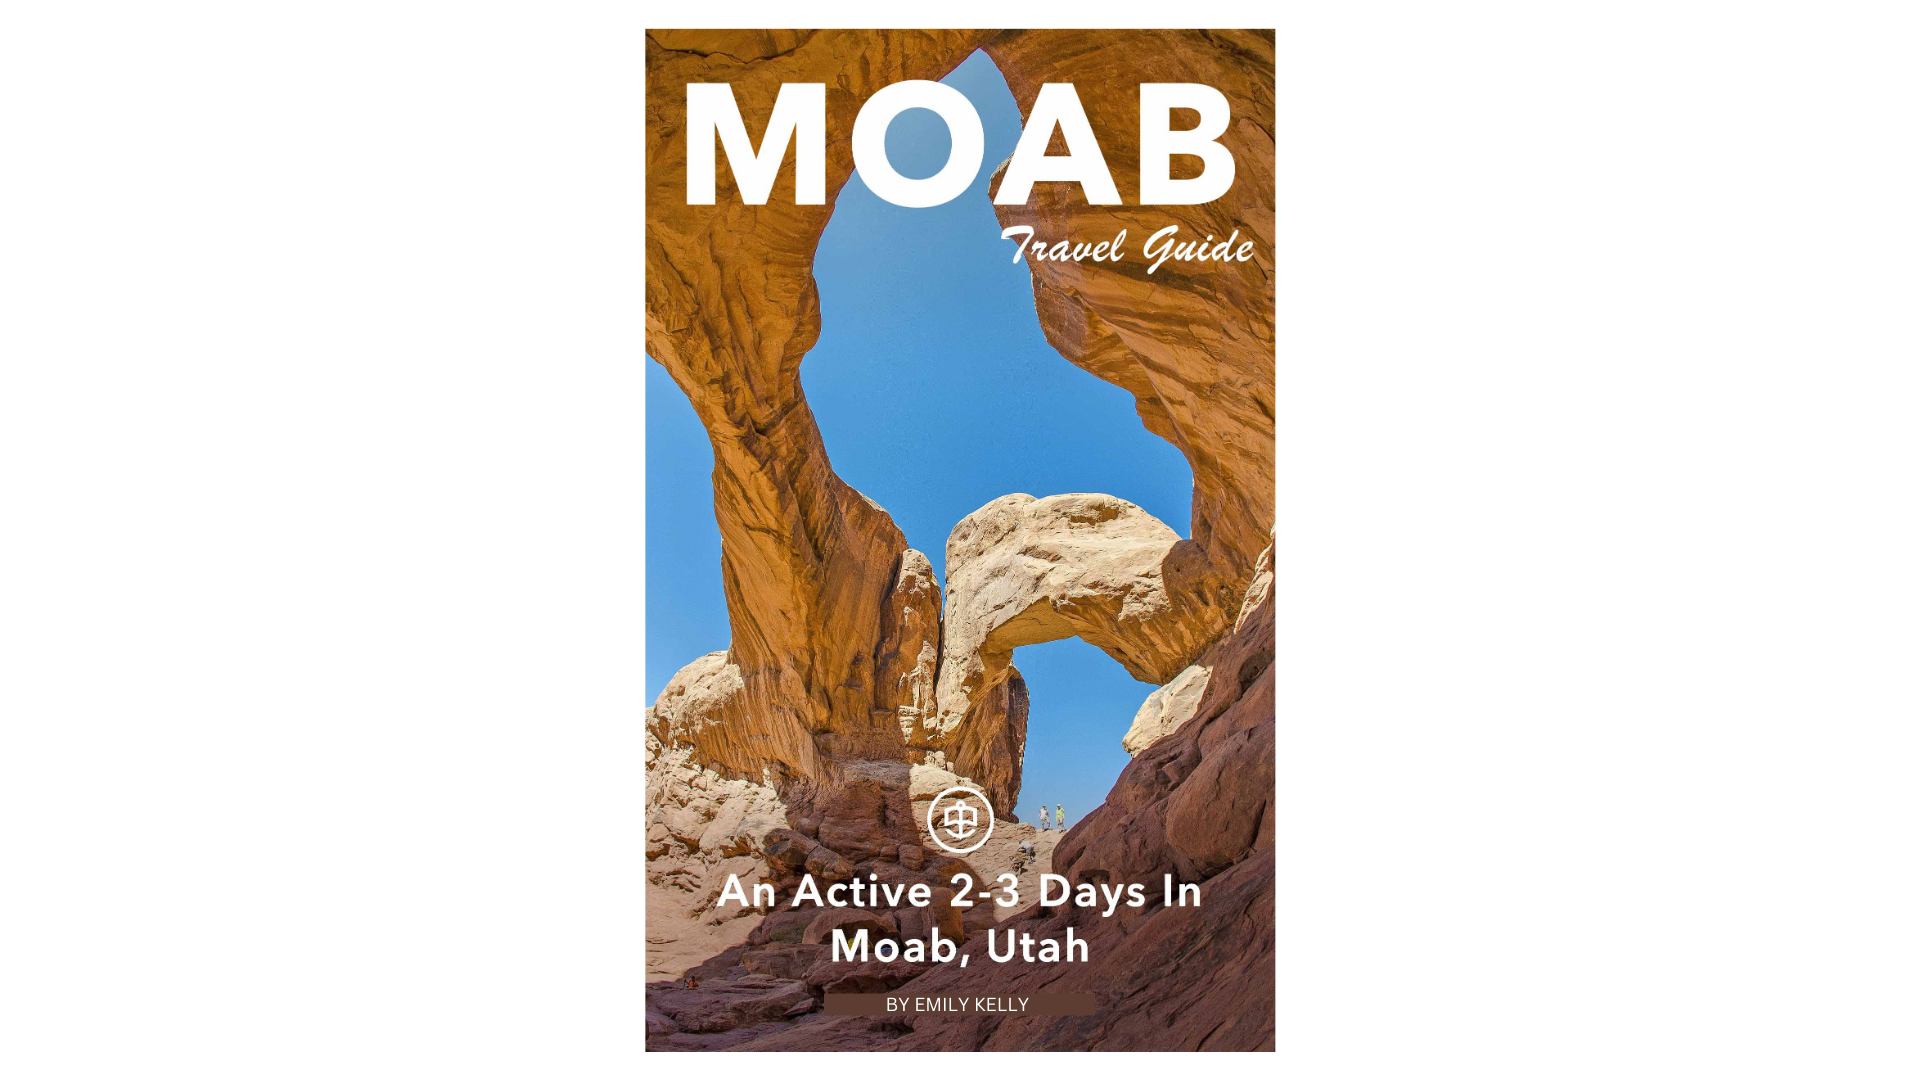 An Active 2-3 Days In Moab, Utah